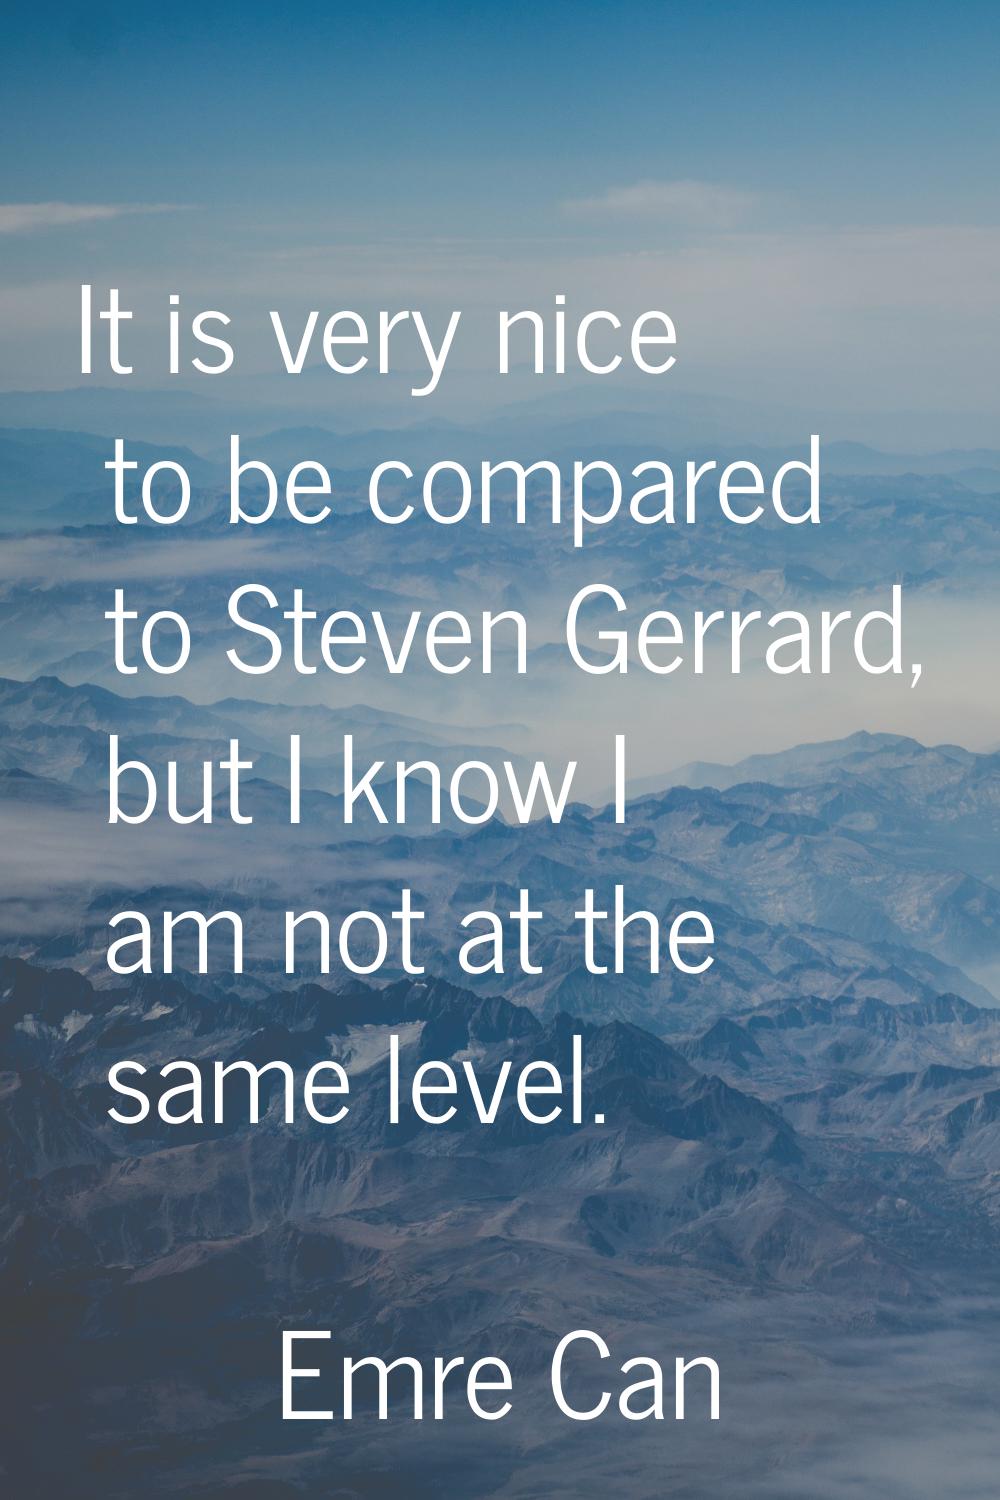 It is very nice to be compared to Steven Gerrard, but I know I am not at the same level.